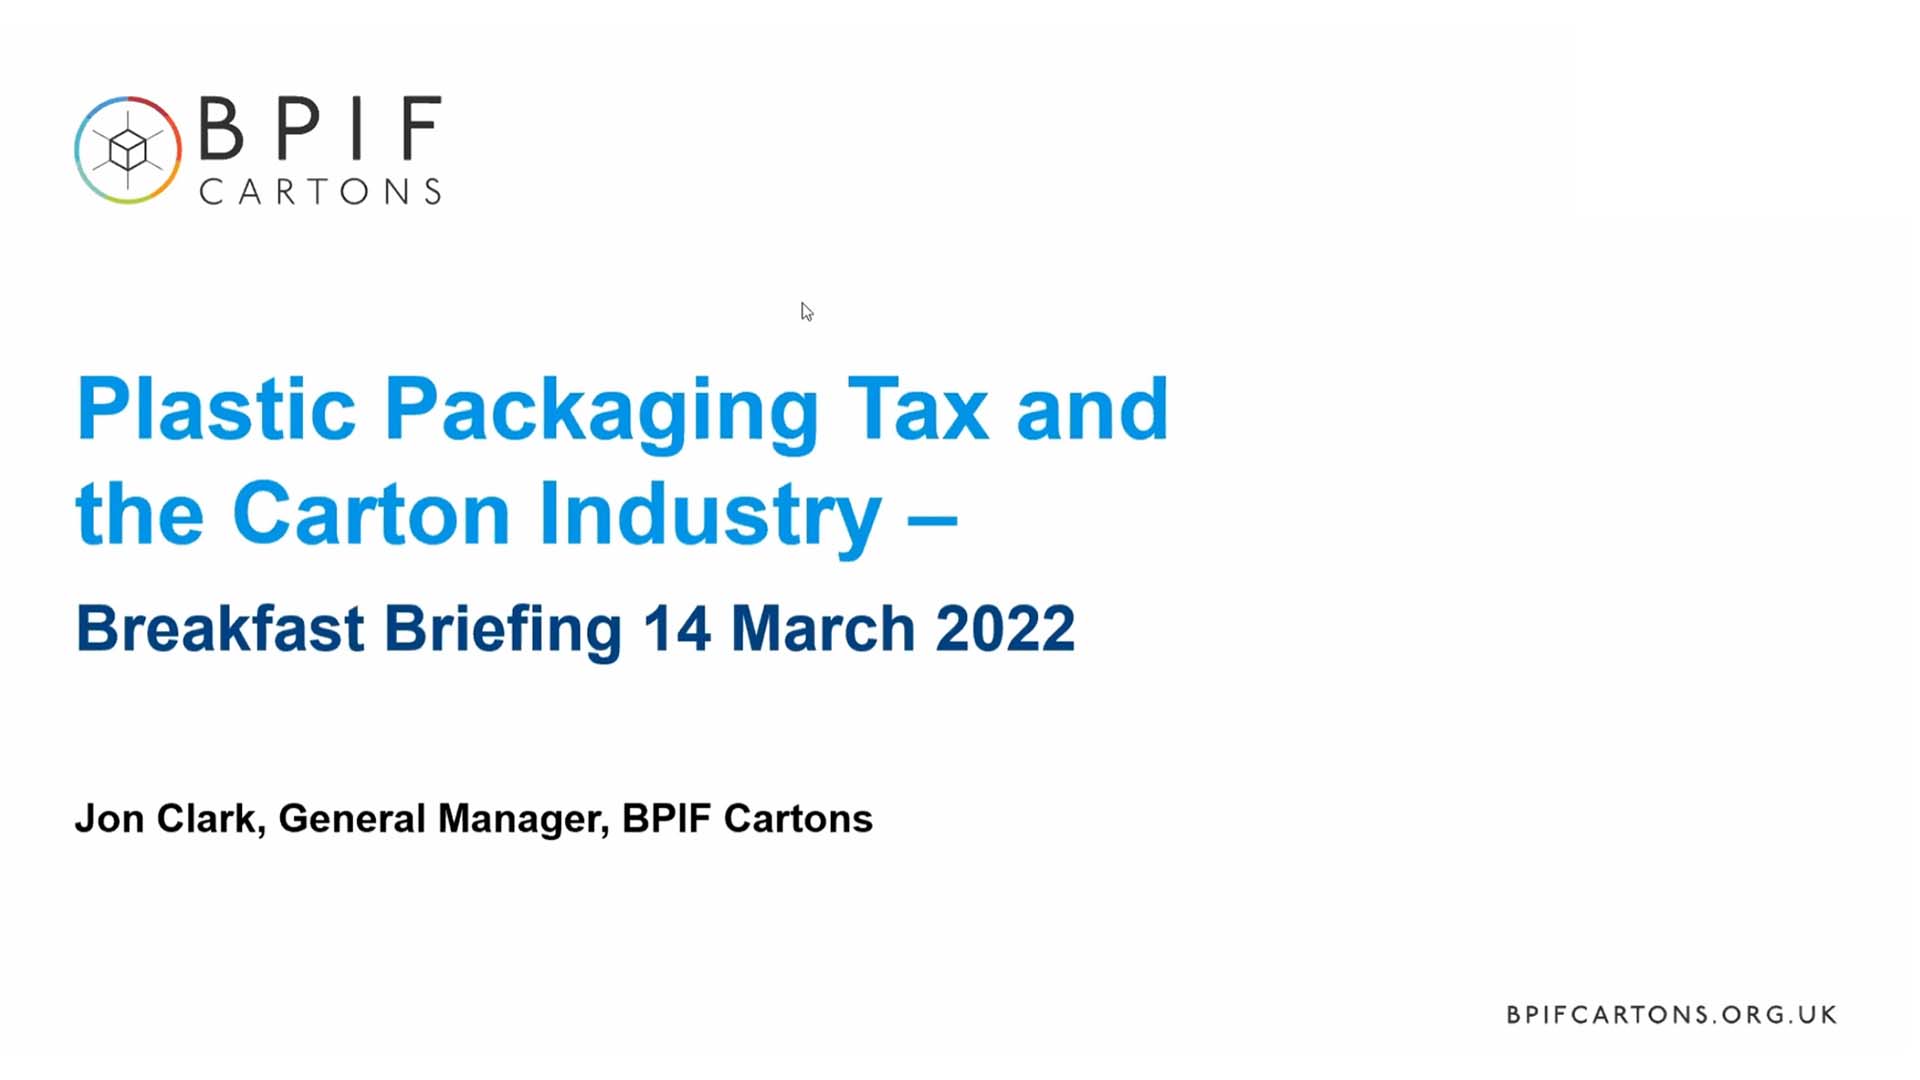 Breakfast Briefing: Plastic Packaging Tax for Cartons - 14.03.2022